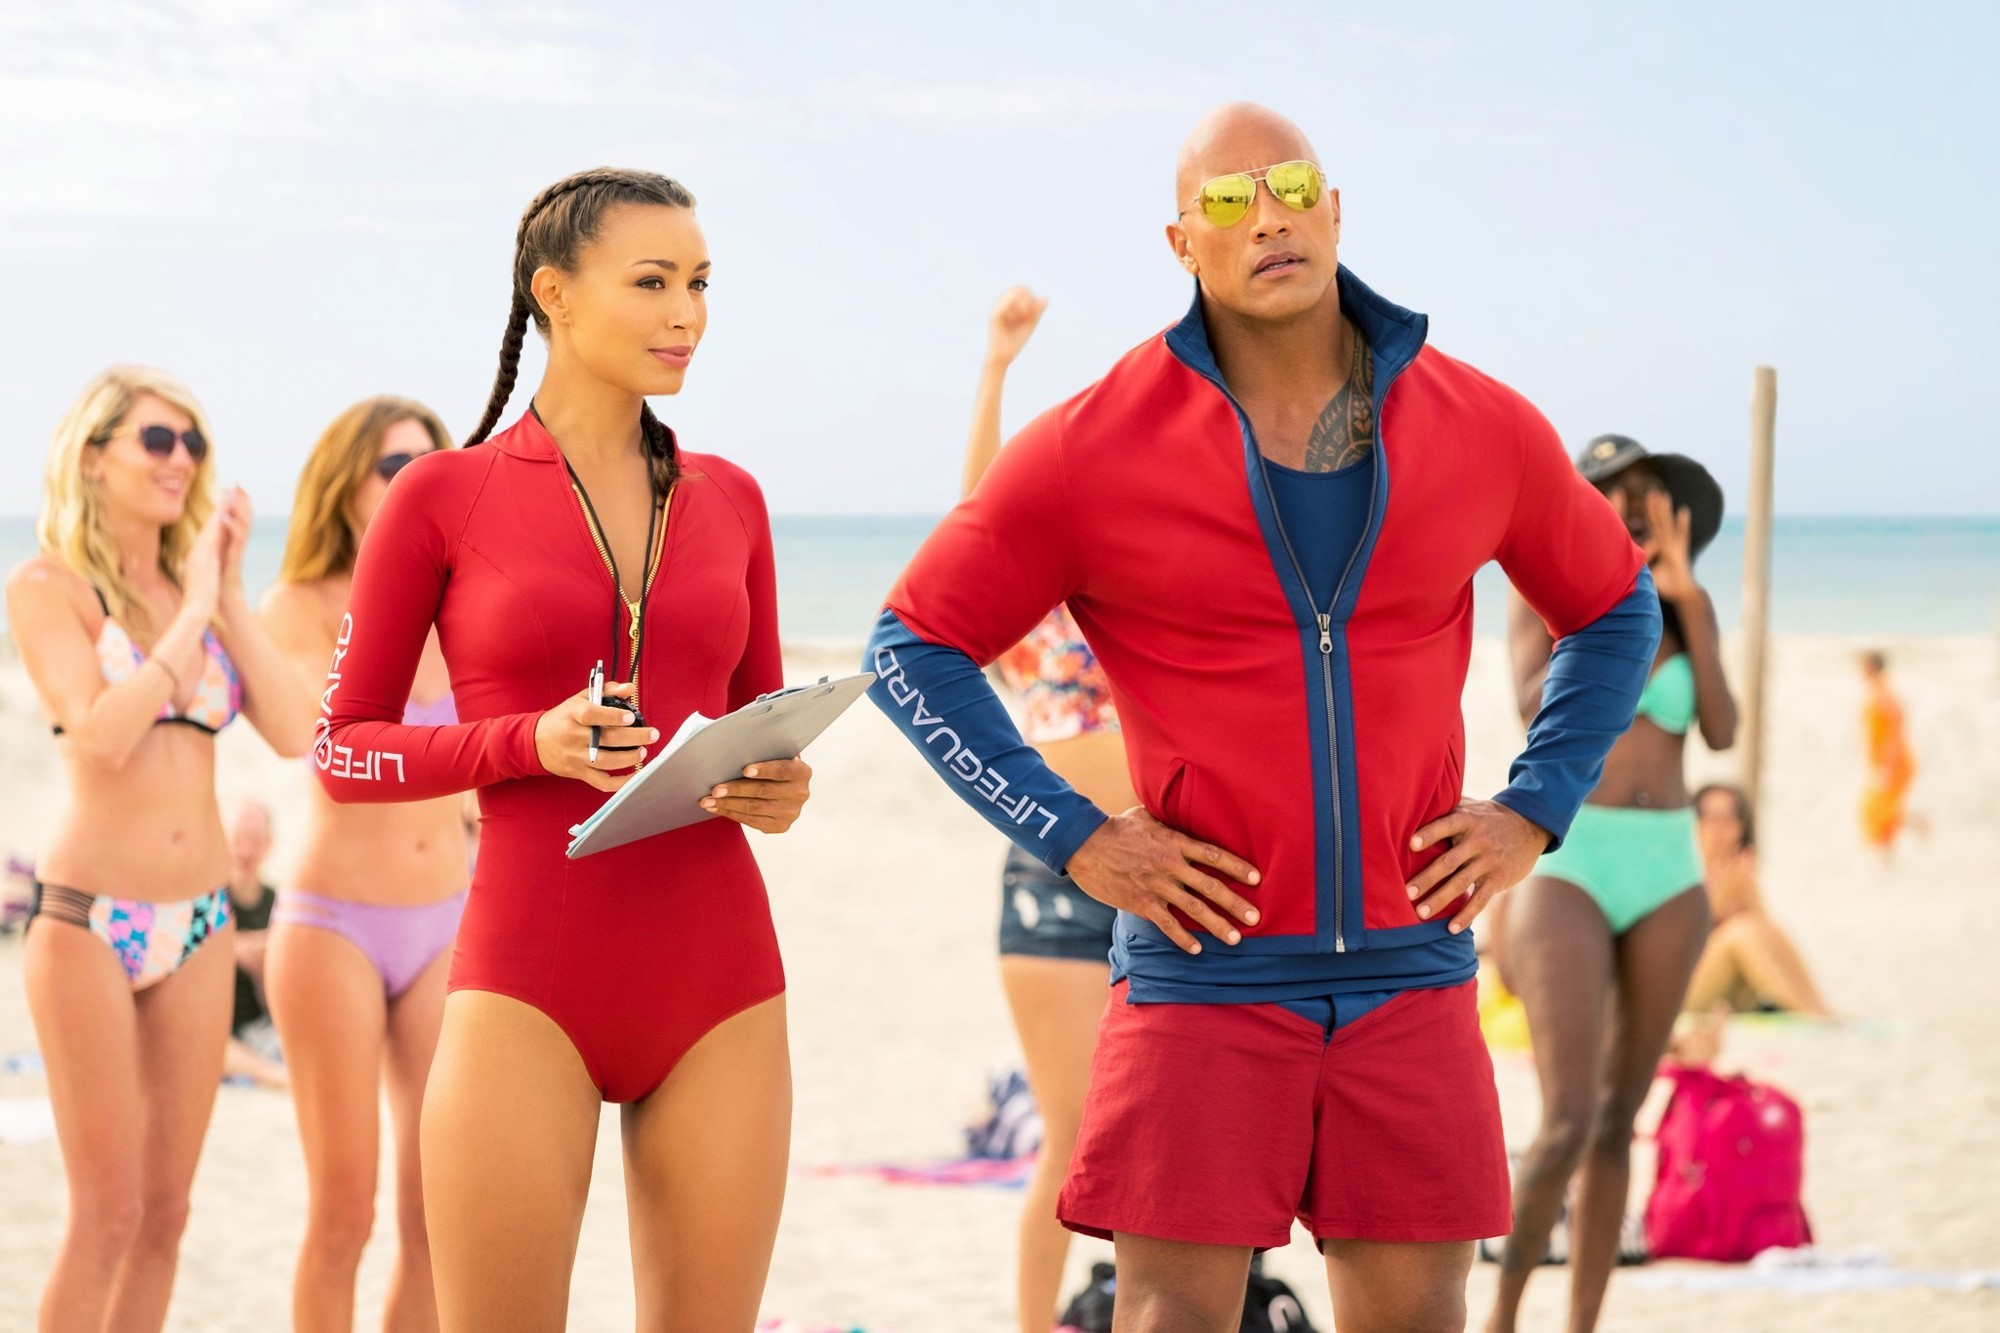 Ilfenesh Hadera stars as Stephanie Holden and The Rock stars as Mitch Buchannon in Paramount Pictures' Baywatch (2017)